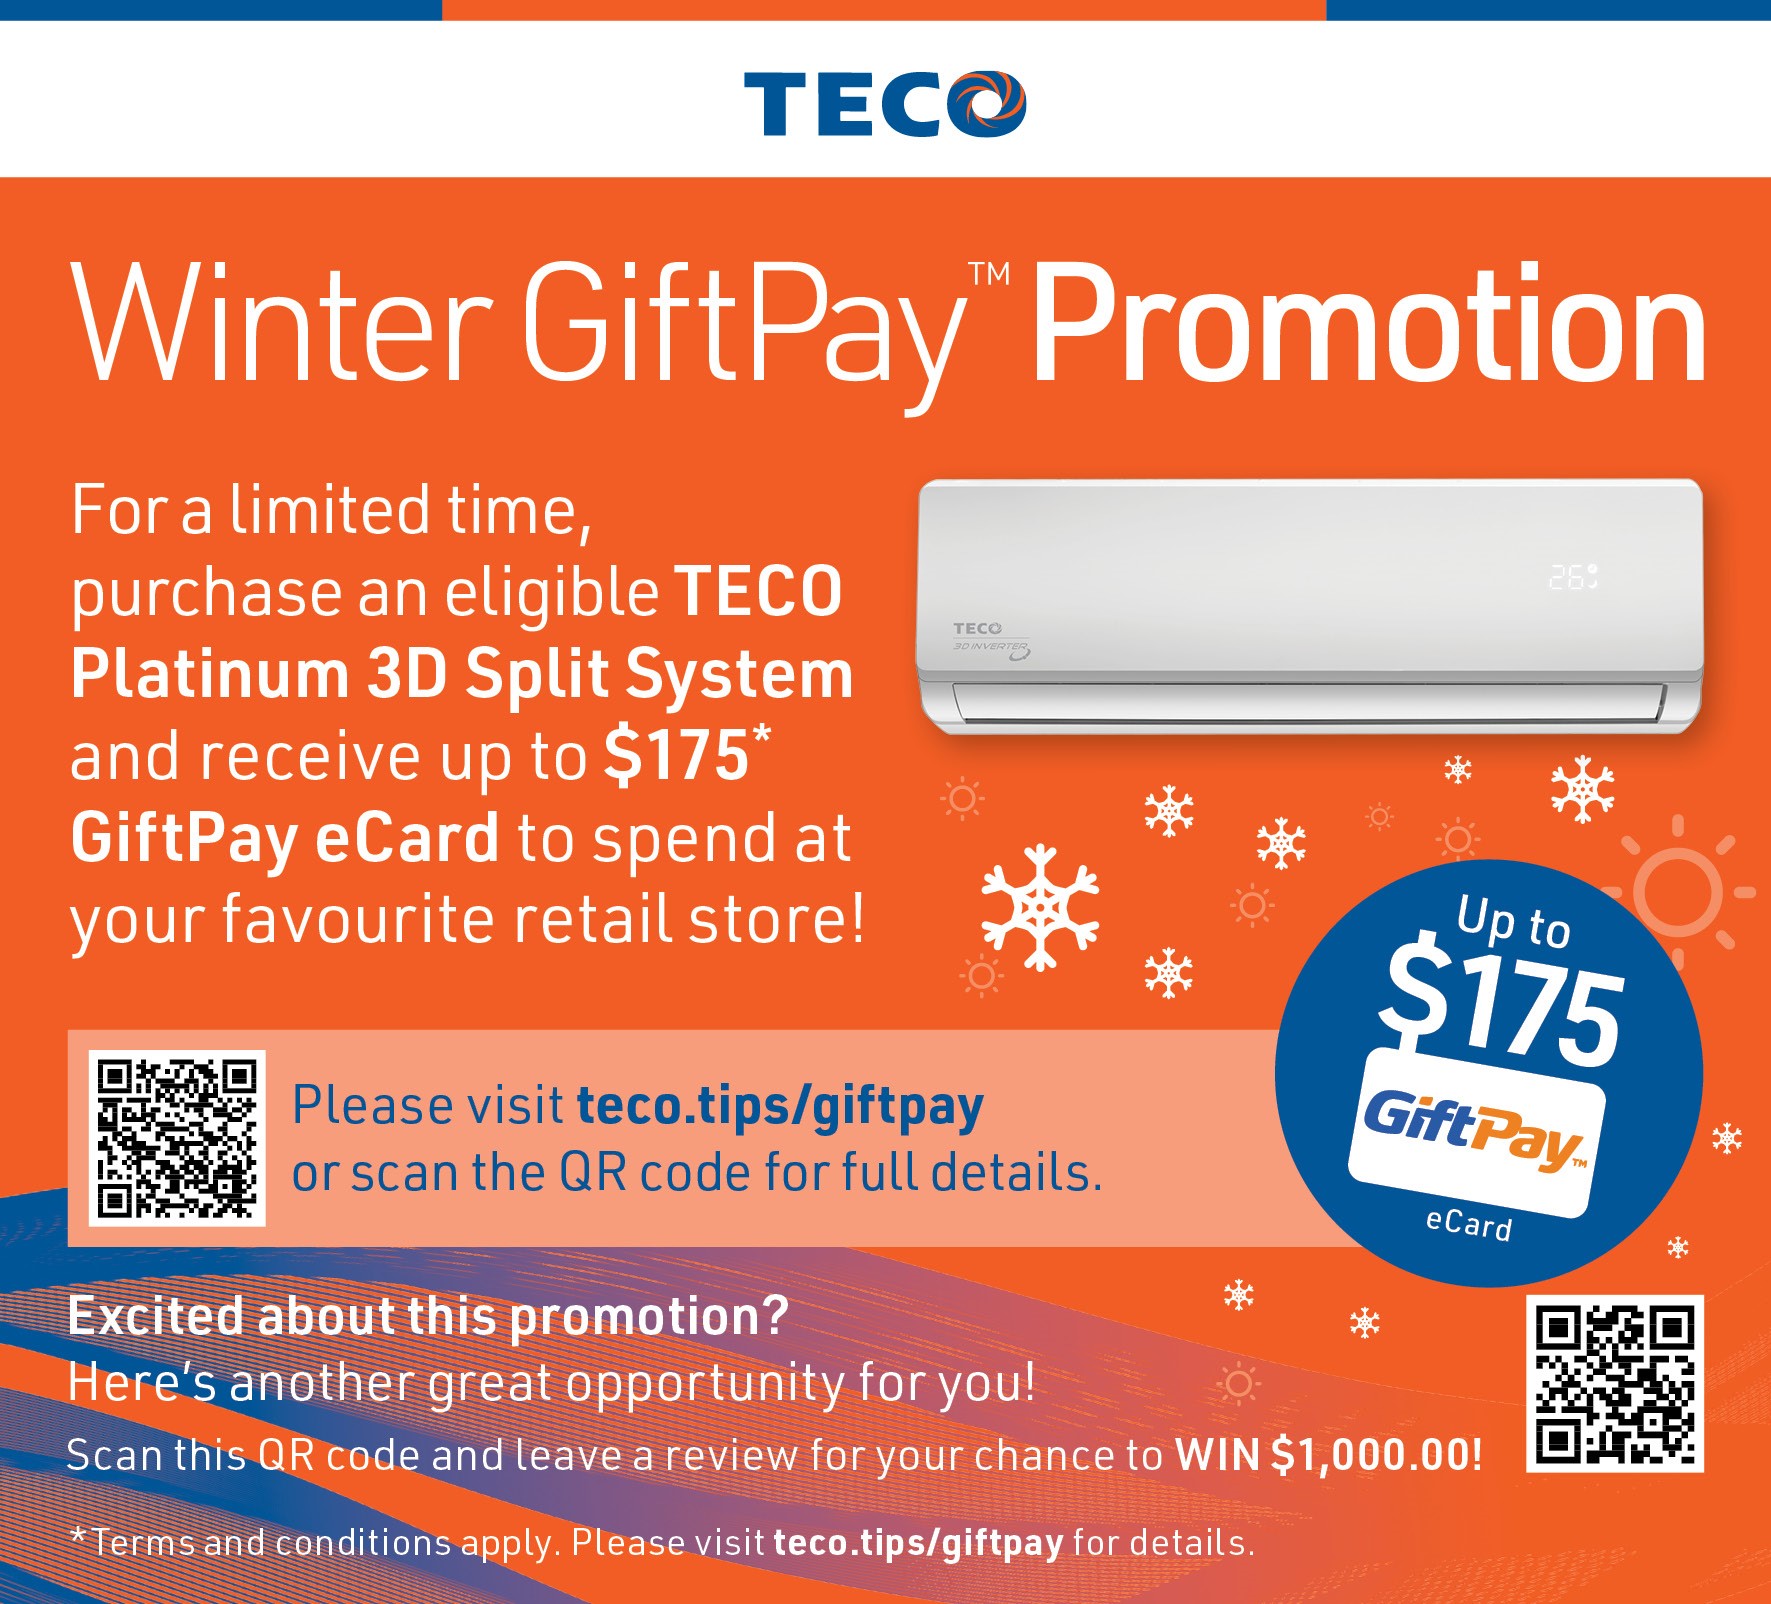 Bonus GiftPay eCard Up To $175* On Selected TECO Platinum 3D Split Systems at Retravision